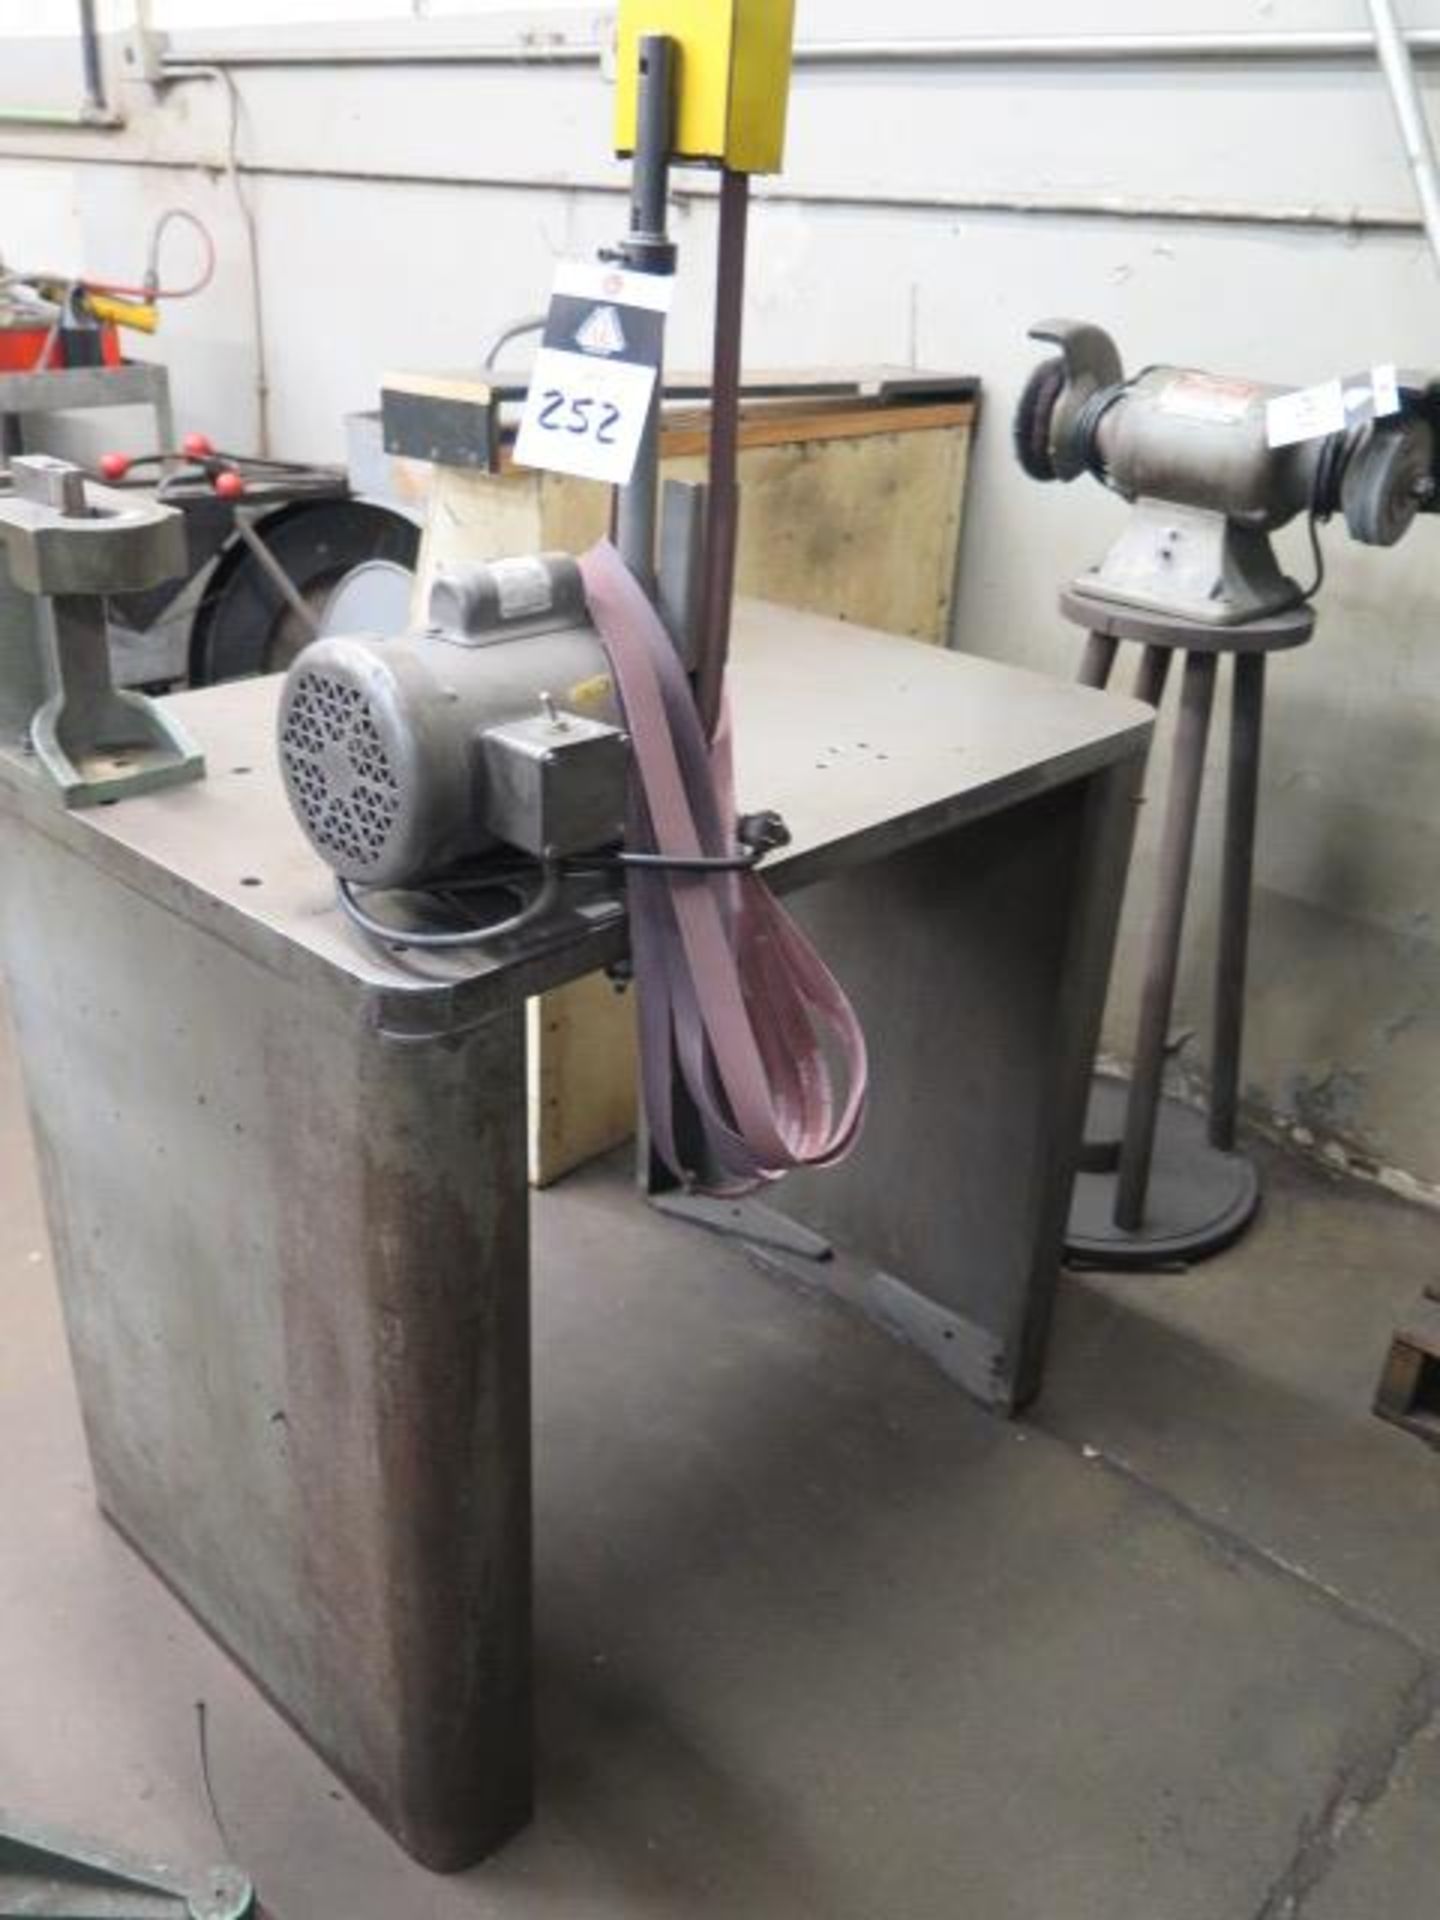 Kalamazoo 1" Belt Sander. 50-Taper Tooling Block and 24" x 36" x 1 1/4" Steel Table (SOLD AS-IS - NO